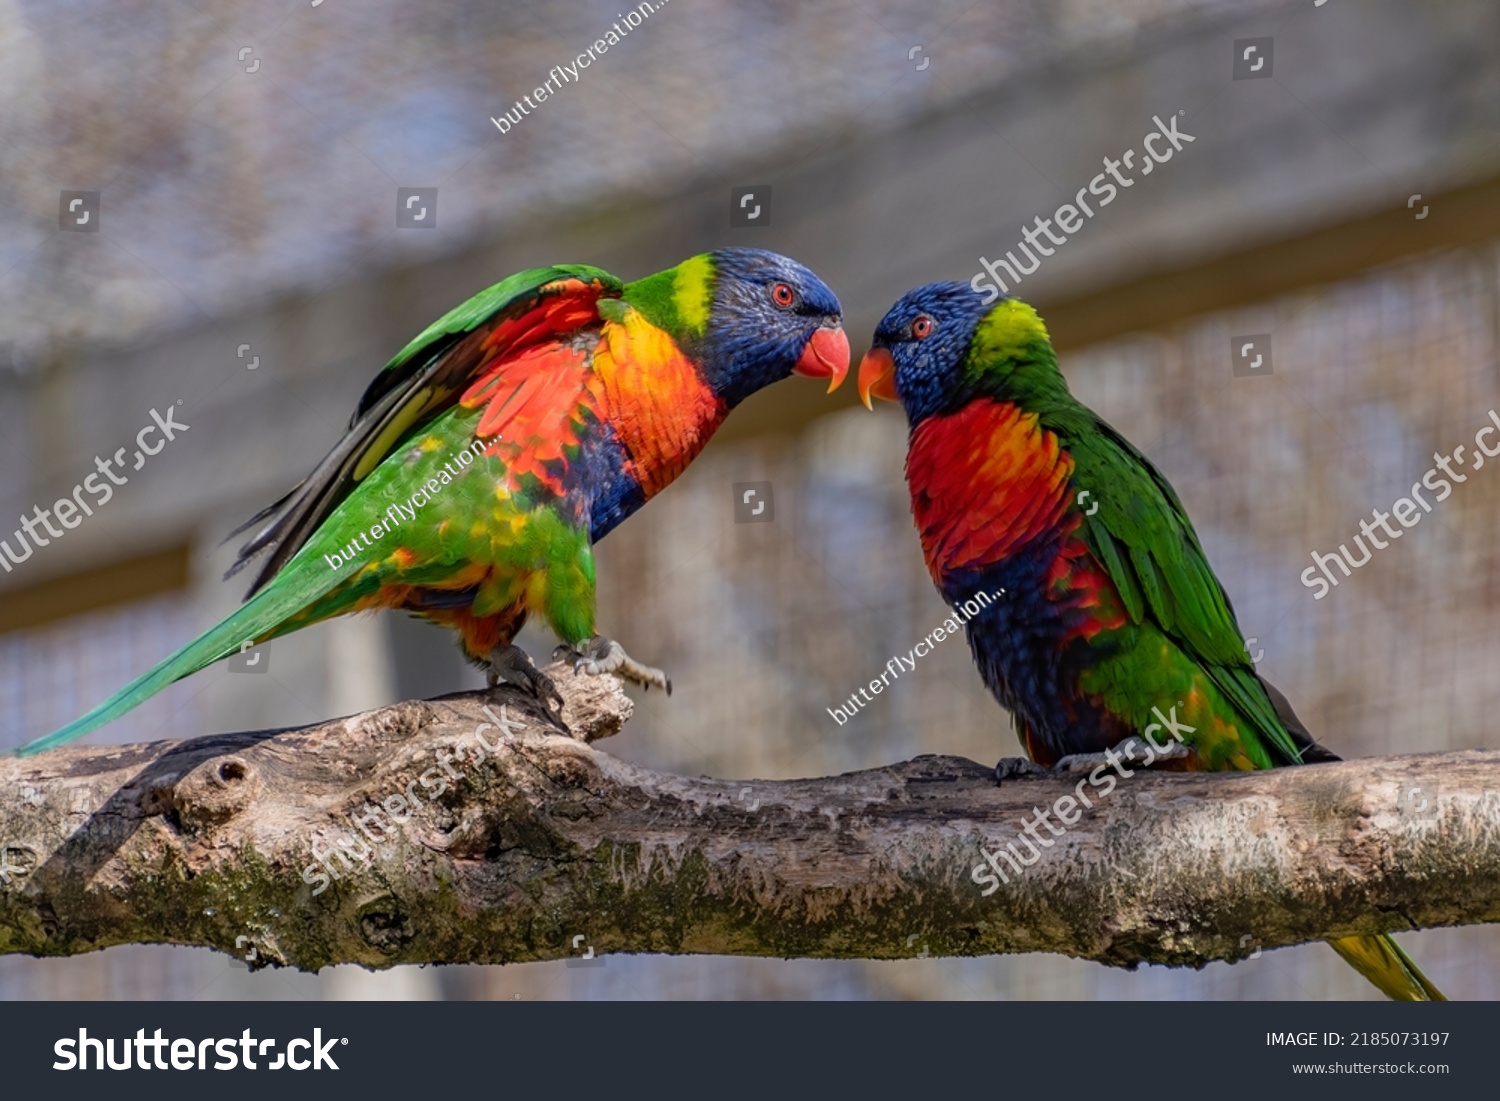 View of 2 colored dwarf parrots, which stand beak to beak on a tree branch, and look at each other in love. #2185073197